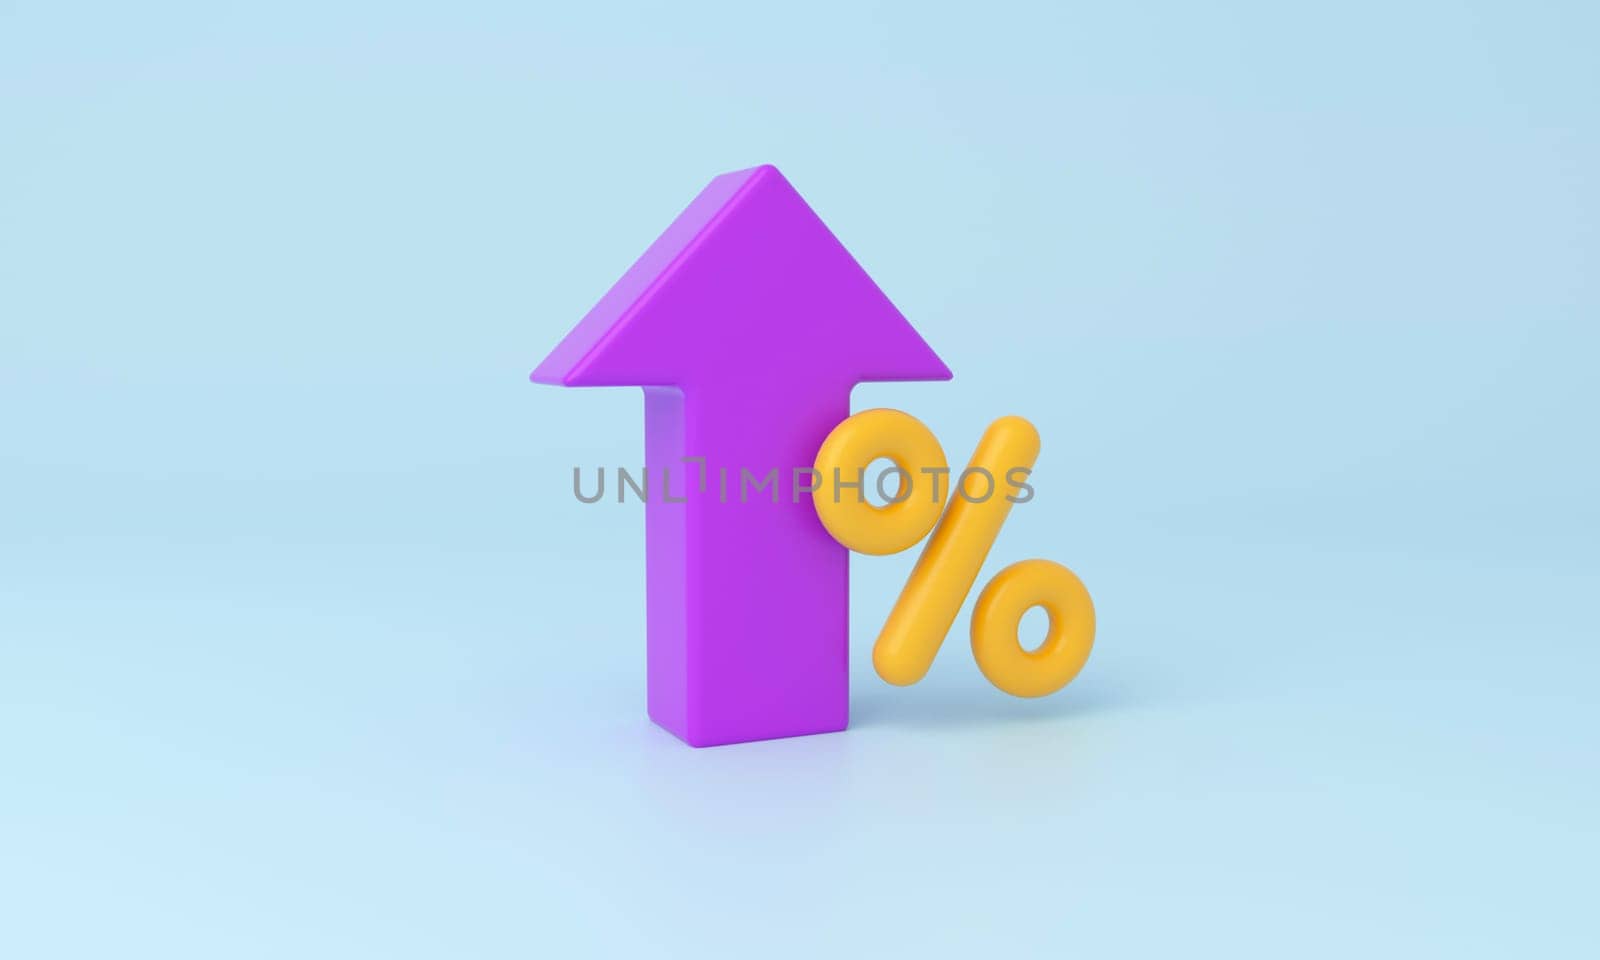 3D illustration showing a bright purple upward arrow and a yellow percent sign, symbolizing a rise in interest rates, on a light blue background.